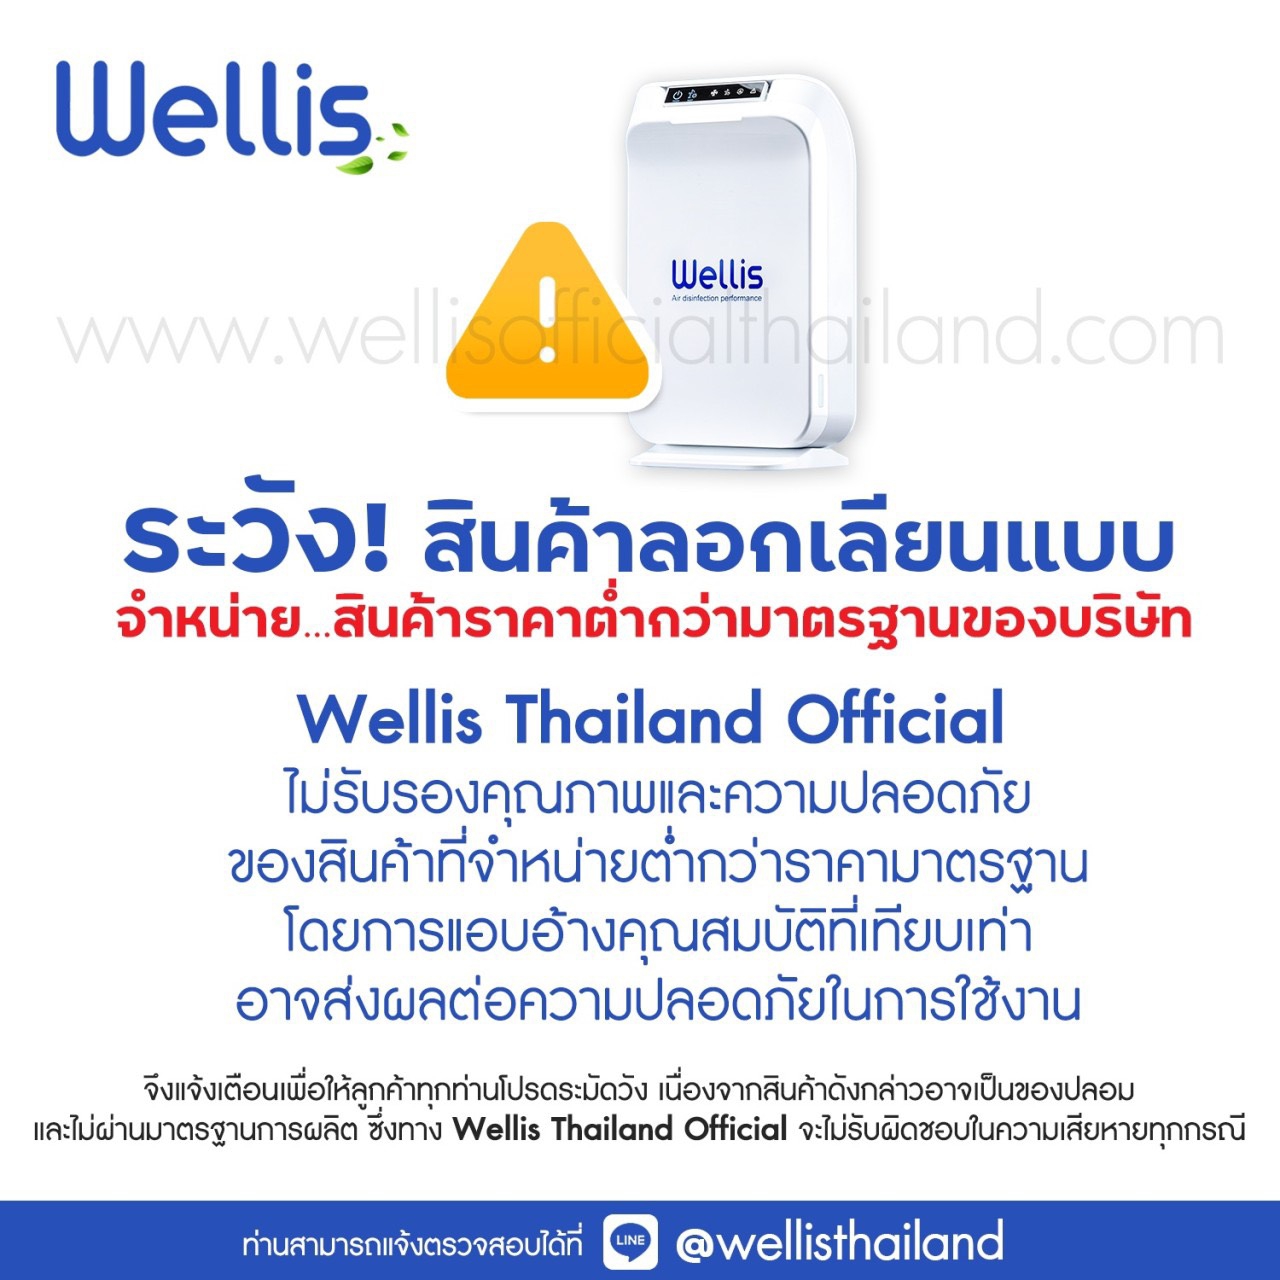 wellis-air-disinfection-purifier-beware-of-counterfeit-products-message